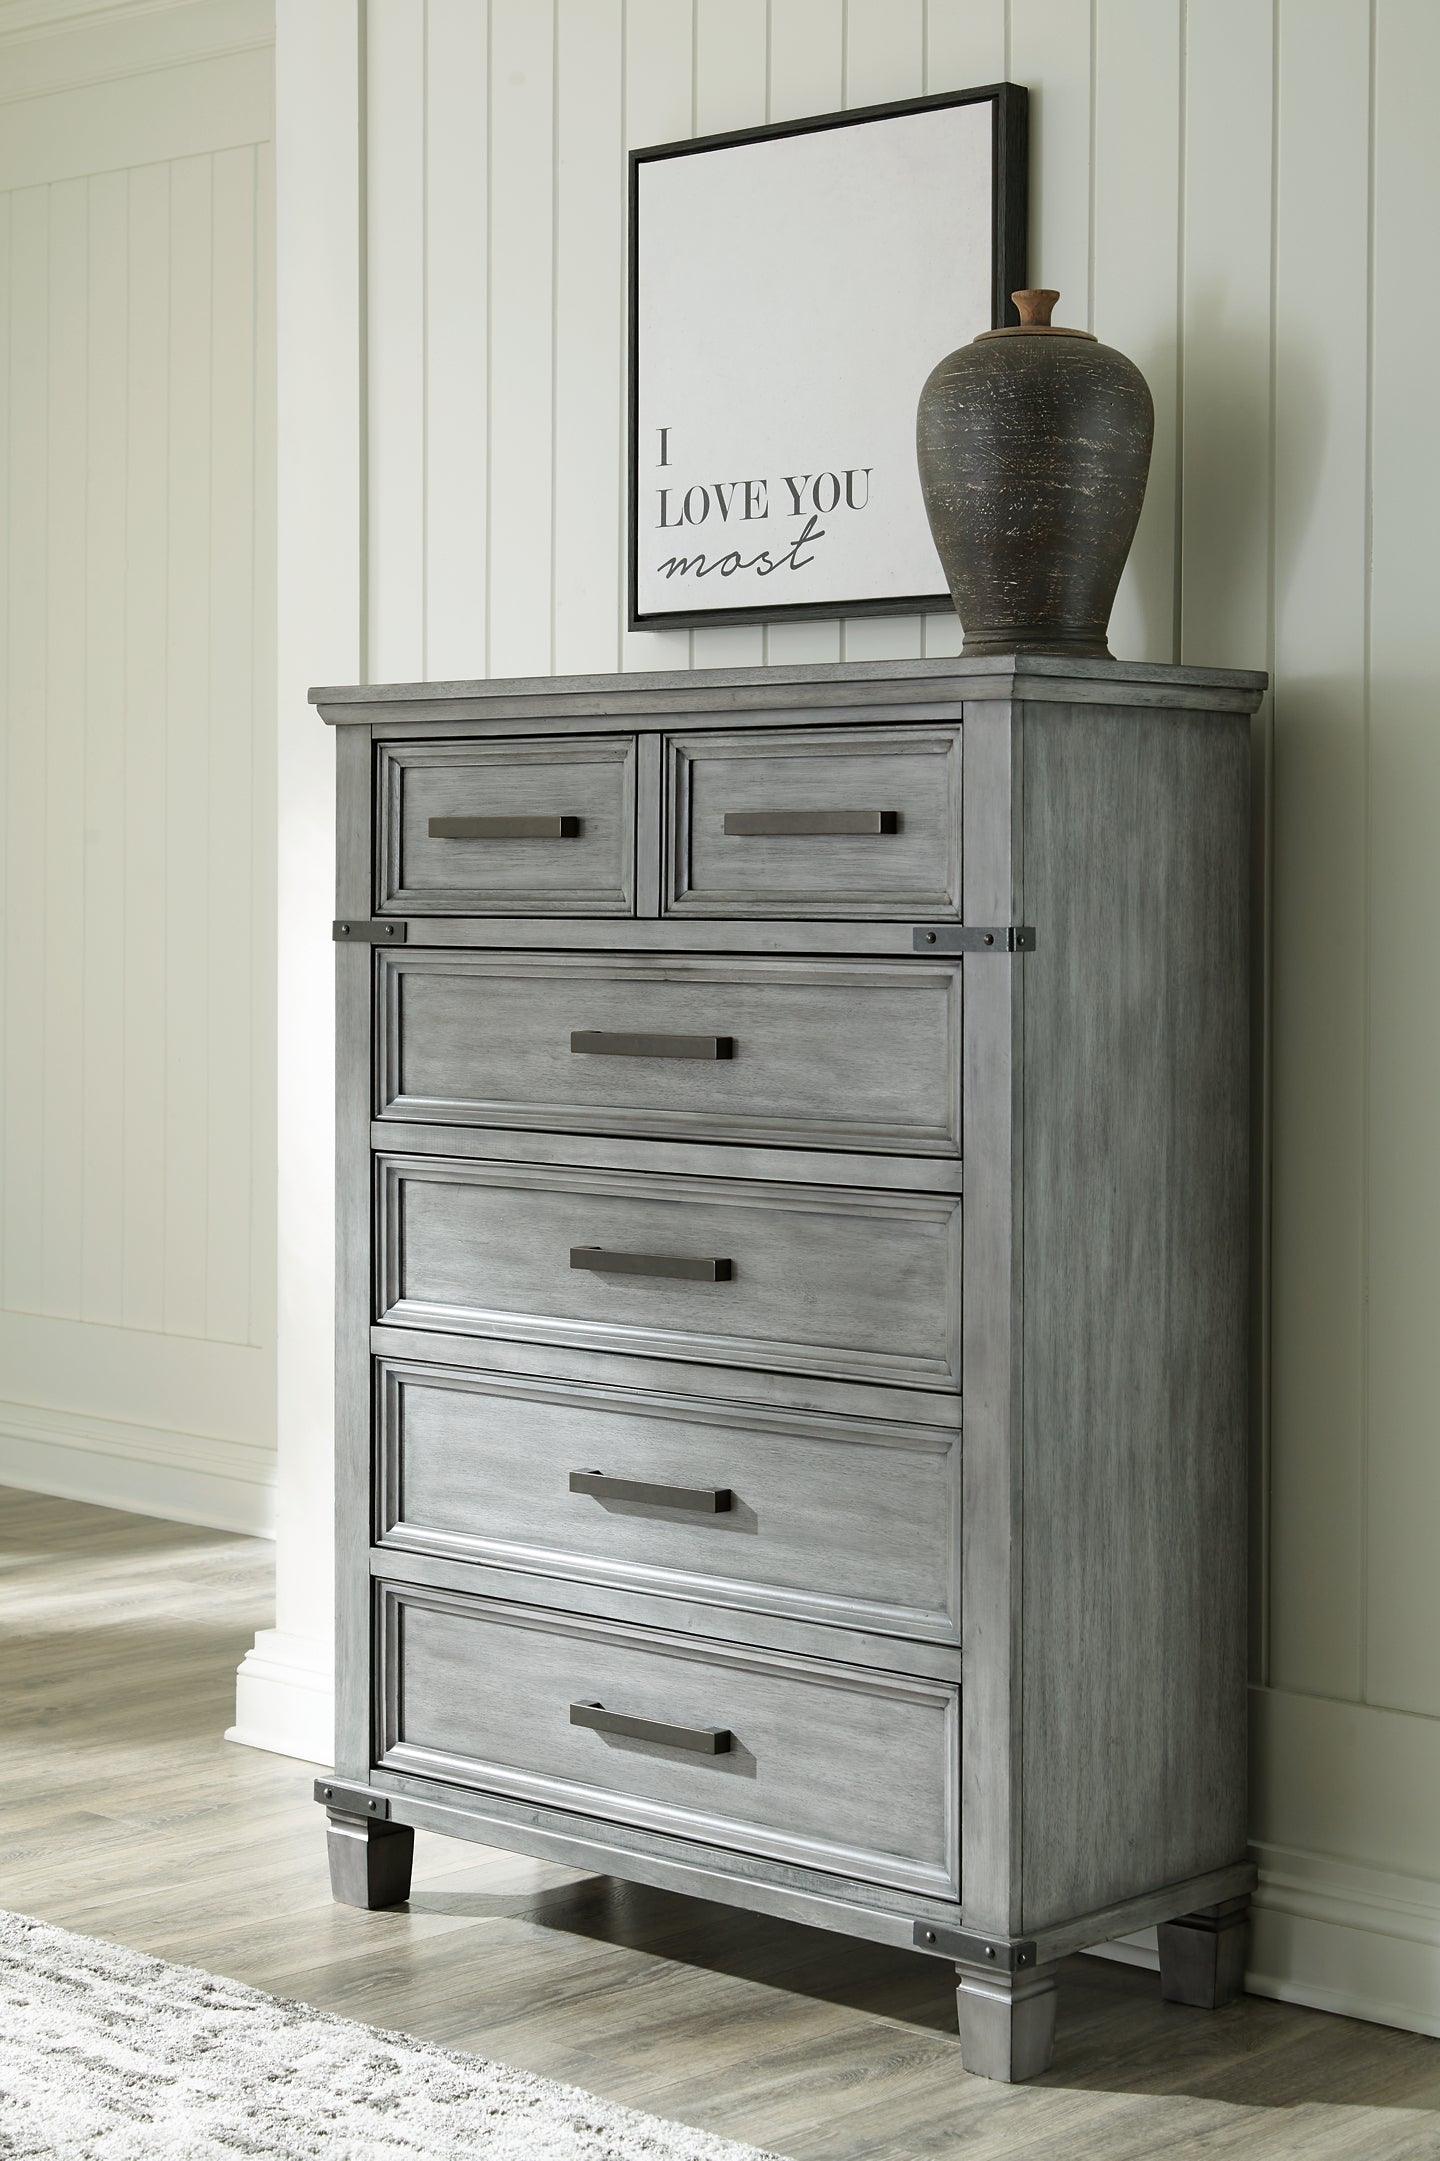 Russelyn Five Drawer Chest JB's Furniture  Home Furniture, Home Decor, Furniture Store